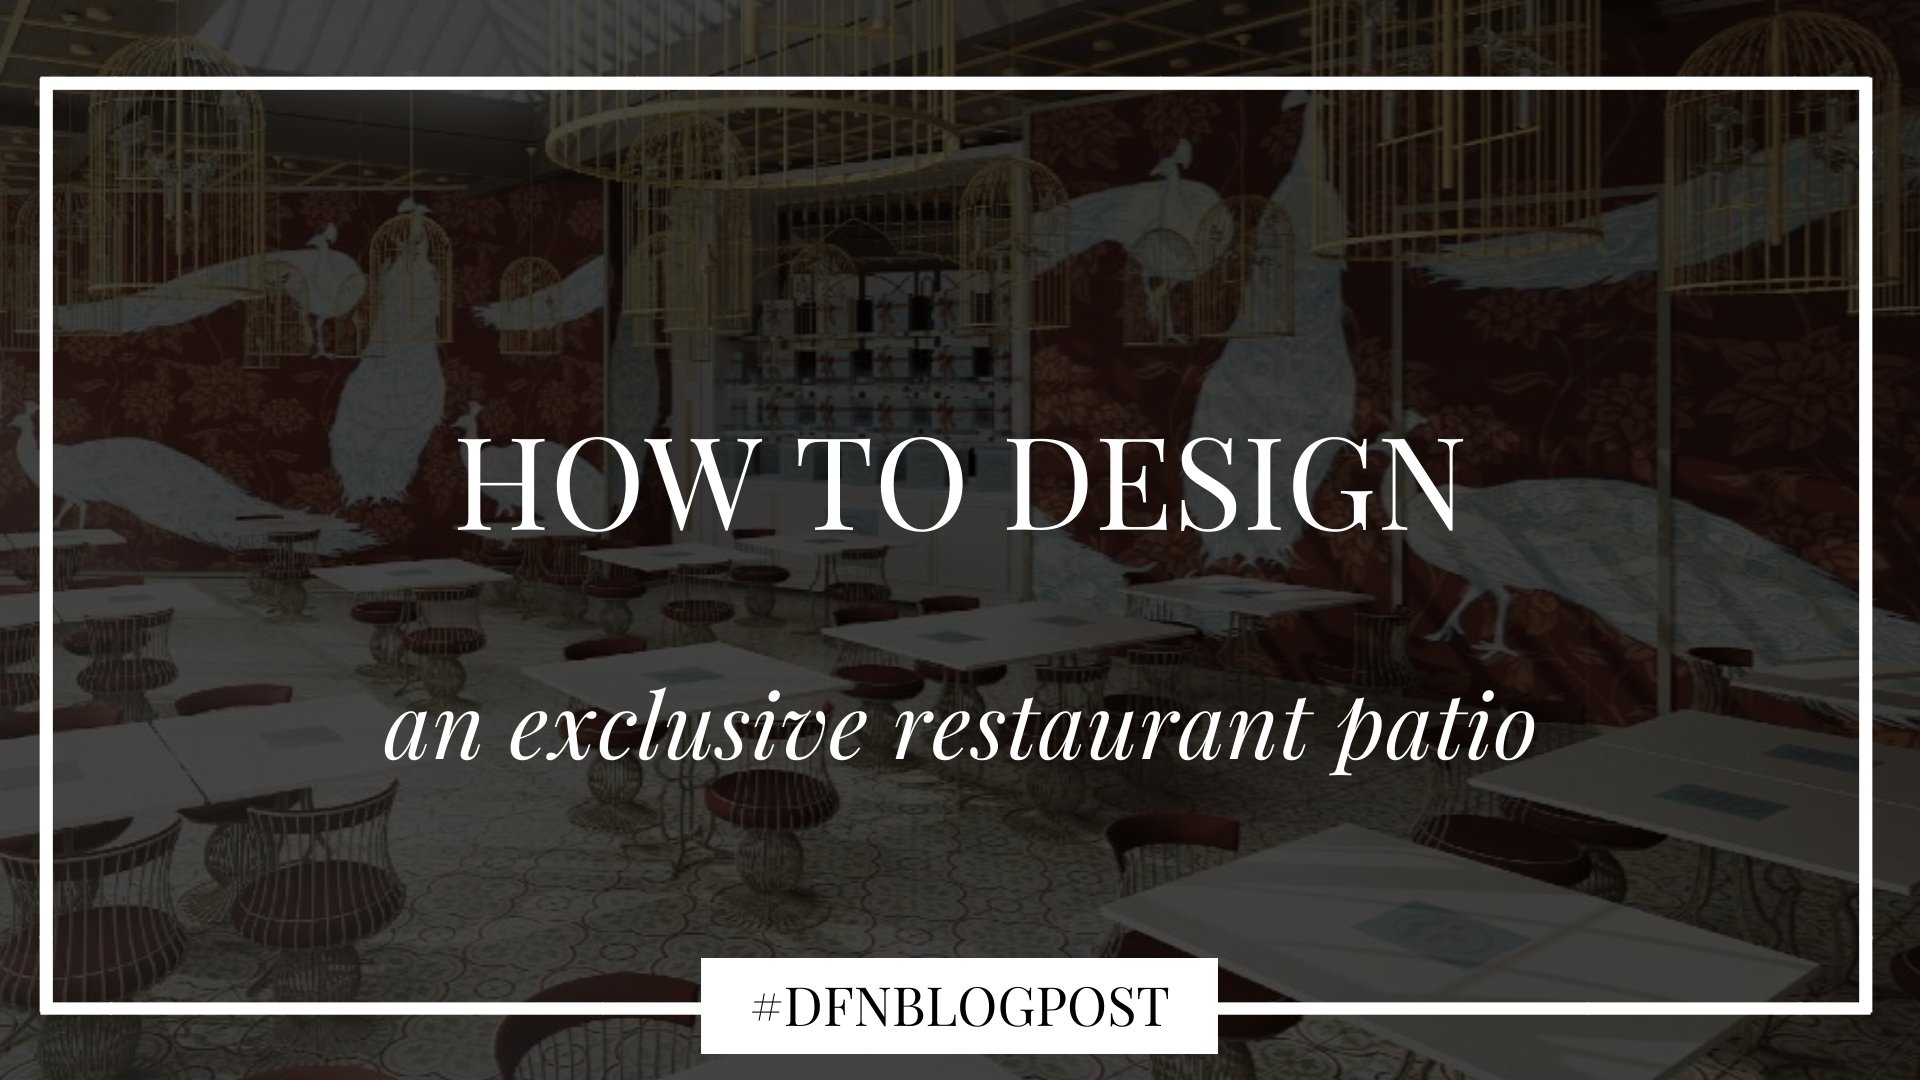 How to design an exclusive restaurant patio